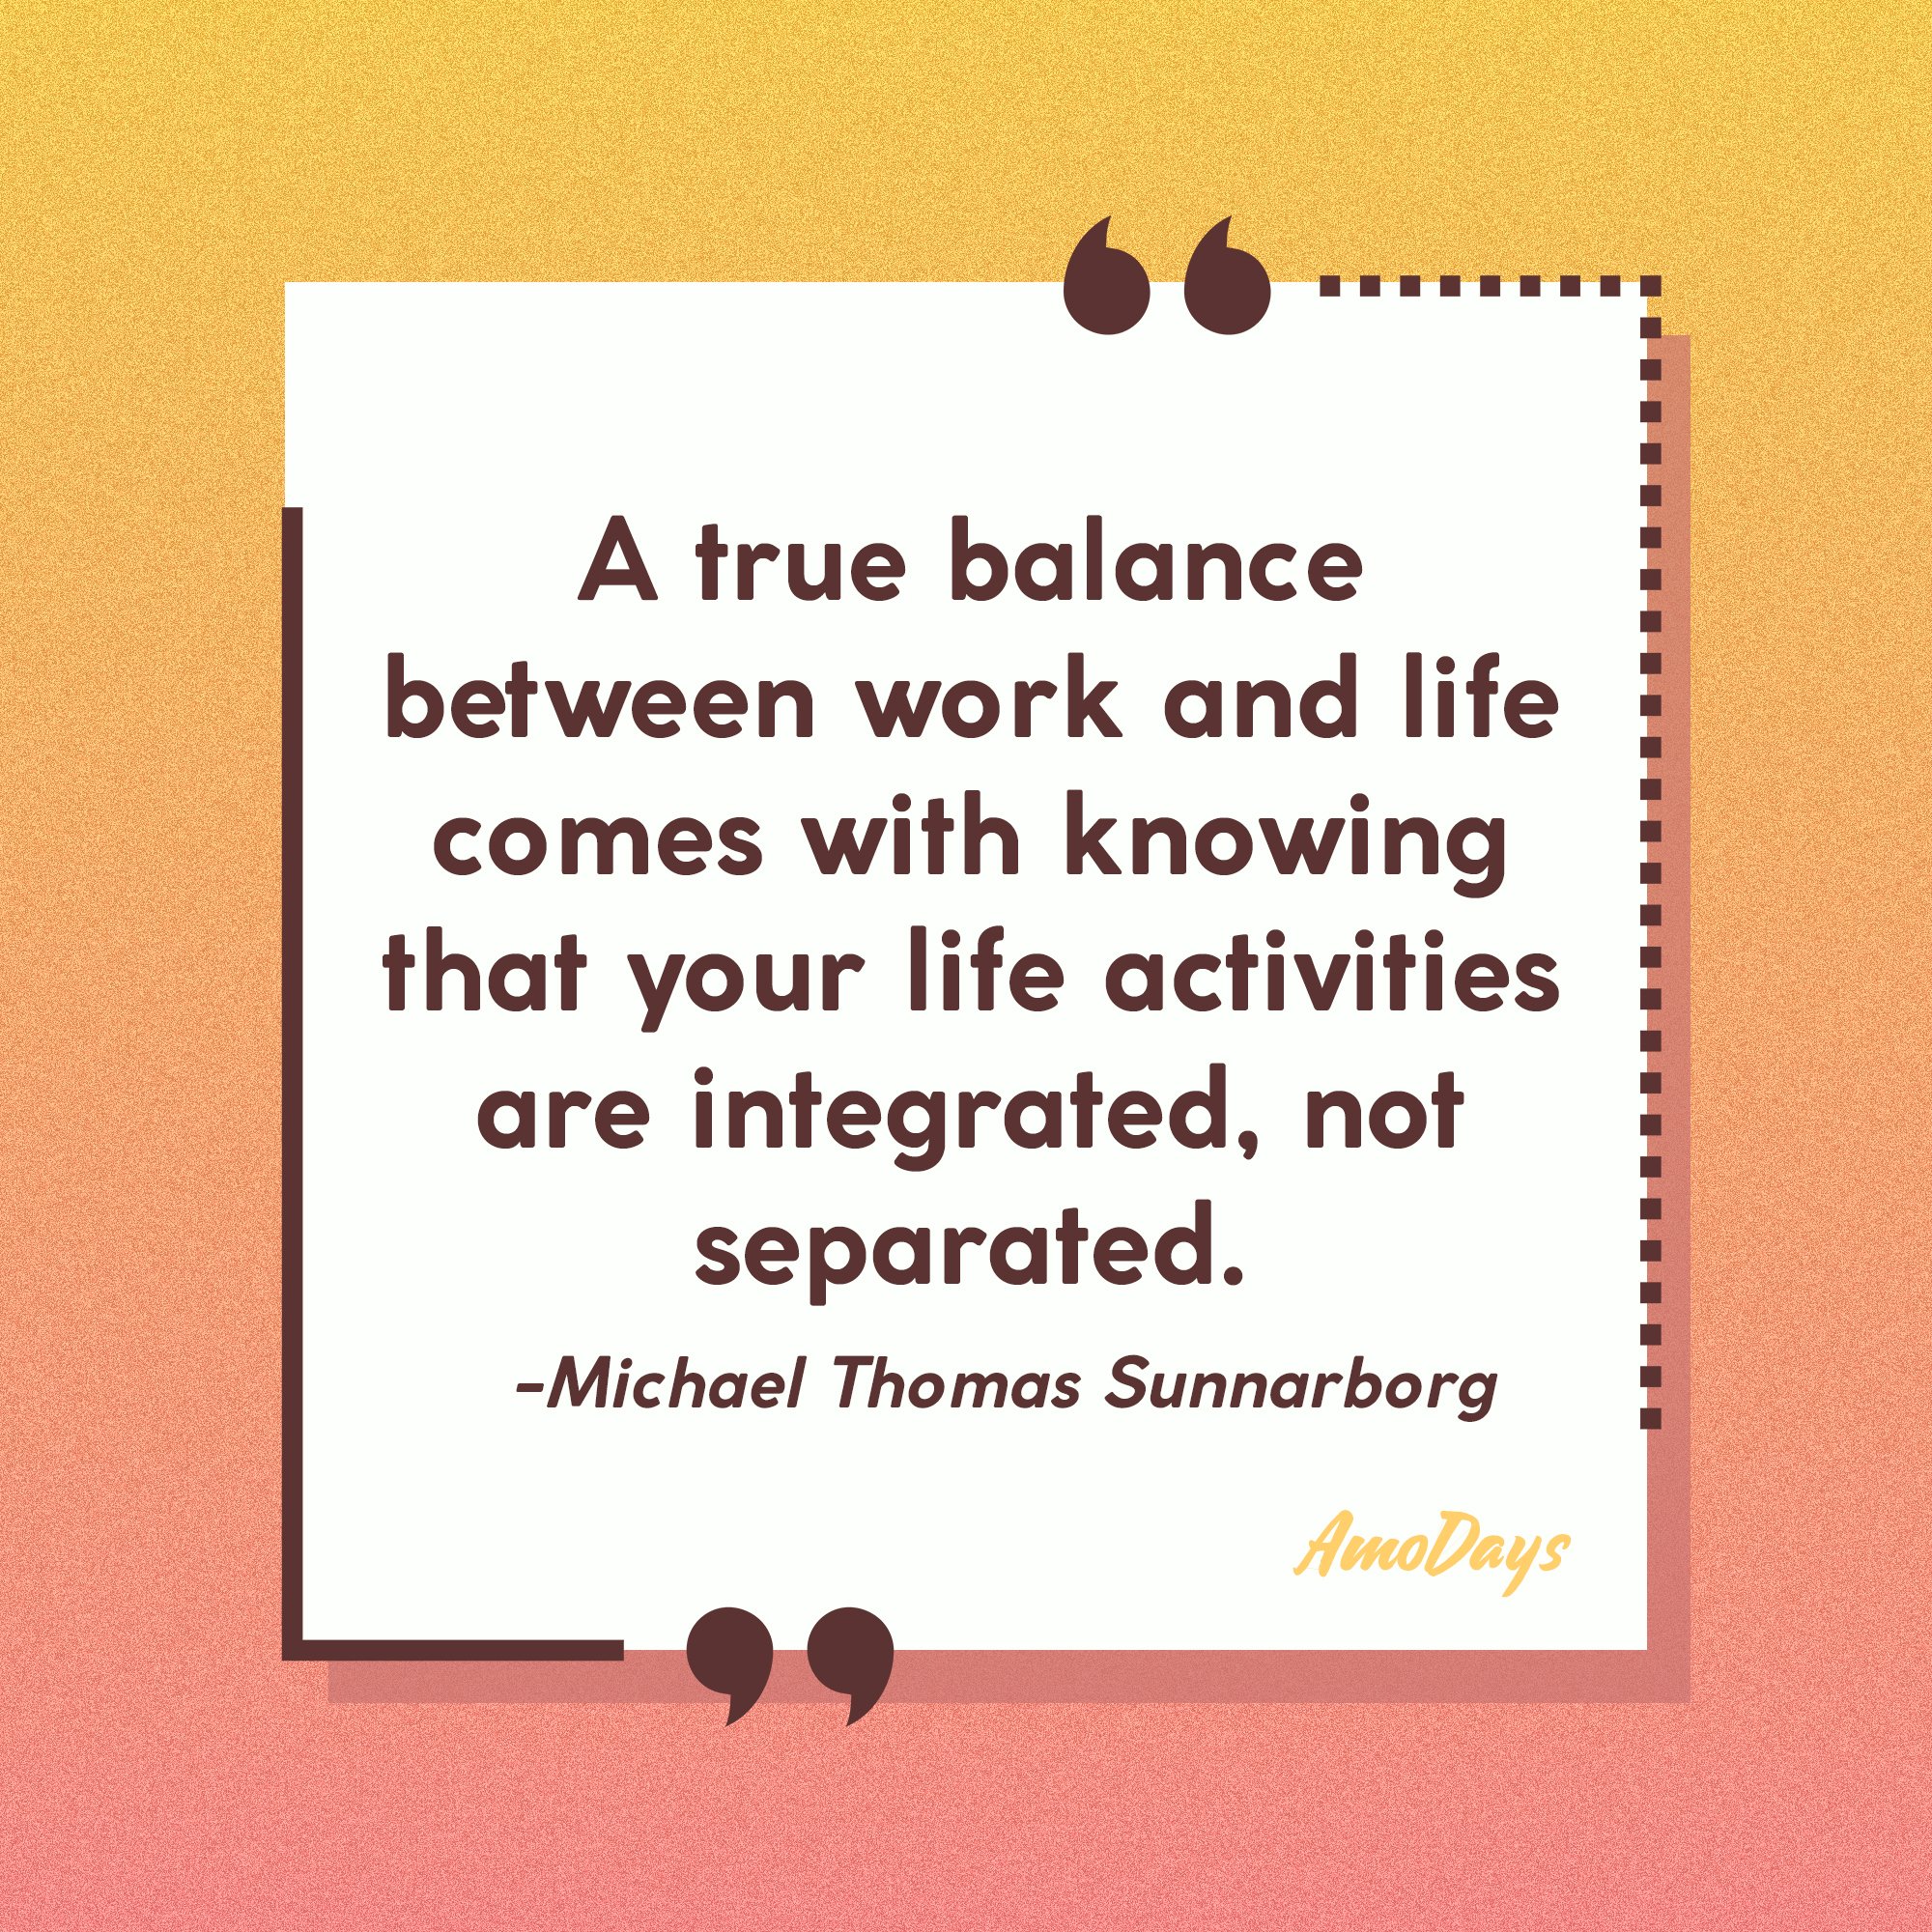 Michael Thomas Sunnarborg's quote: “A true balance between work and life comes with knowing that your life activities are integrated, not separated.” | Image: Amodays